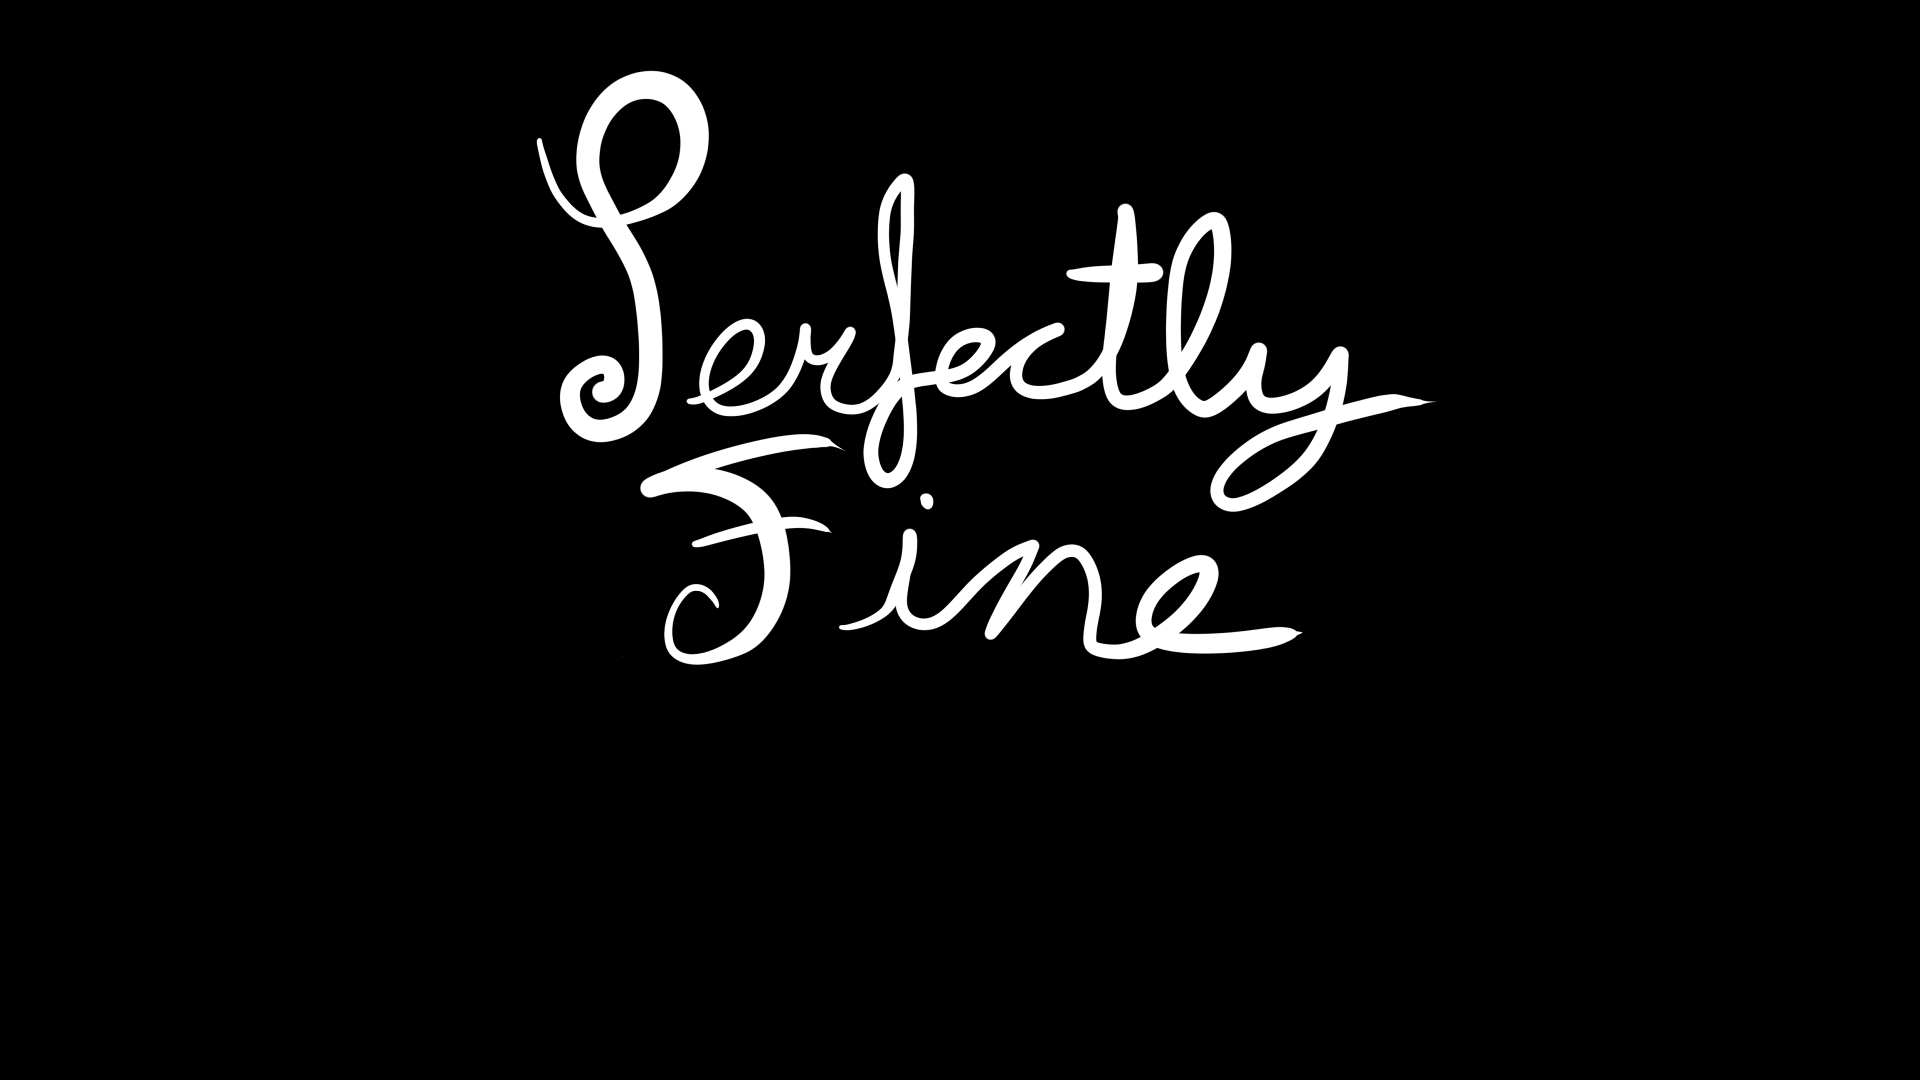 Perfectly Fine